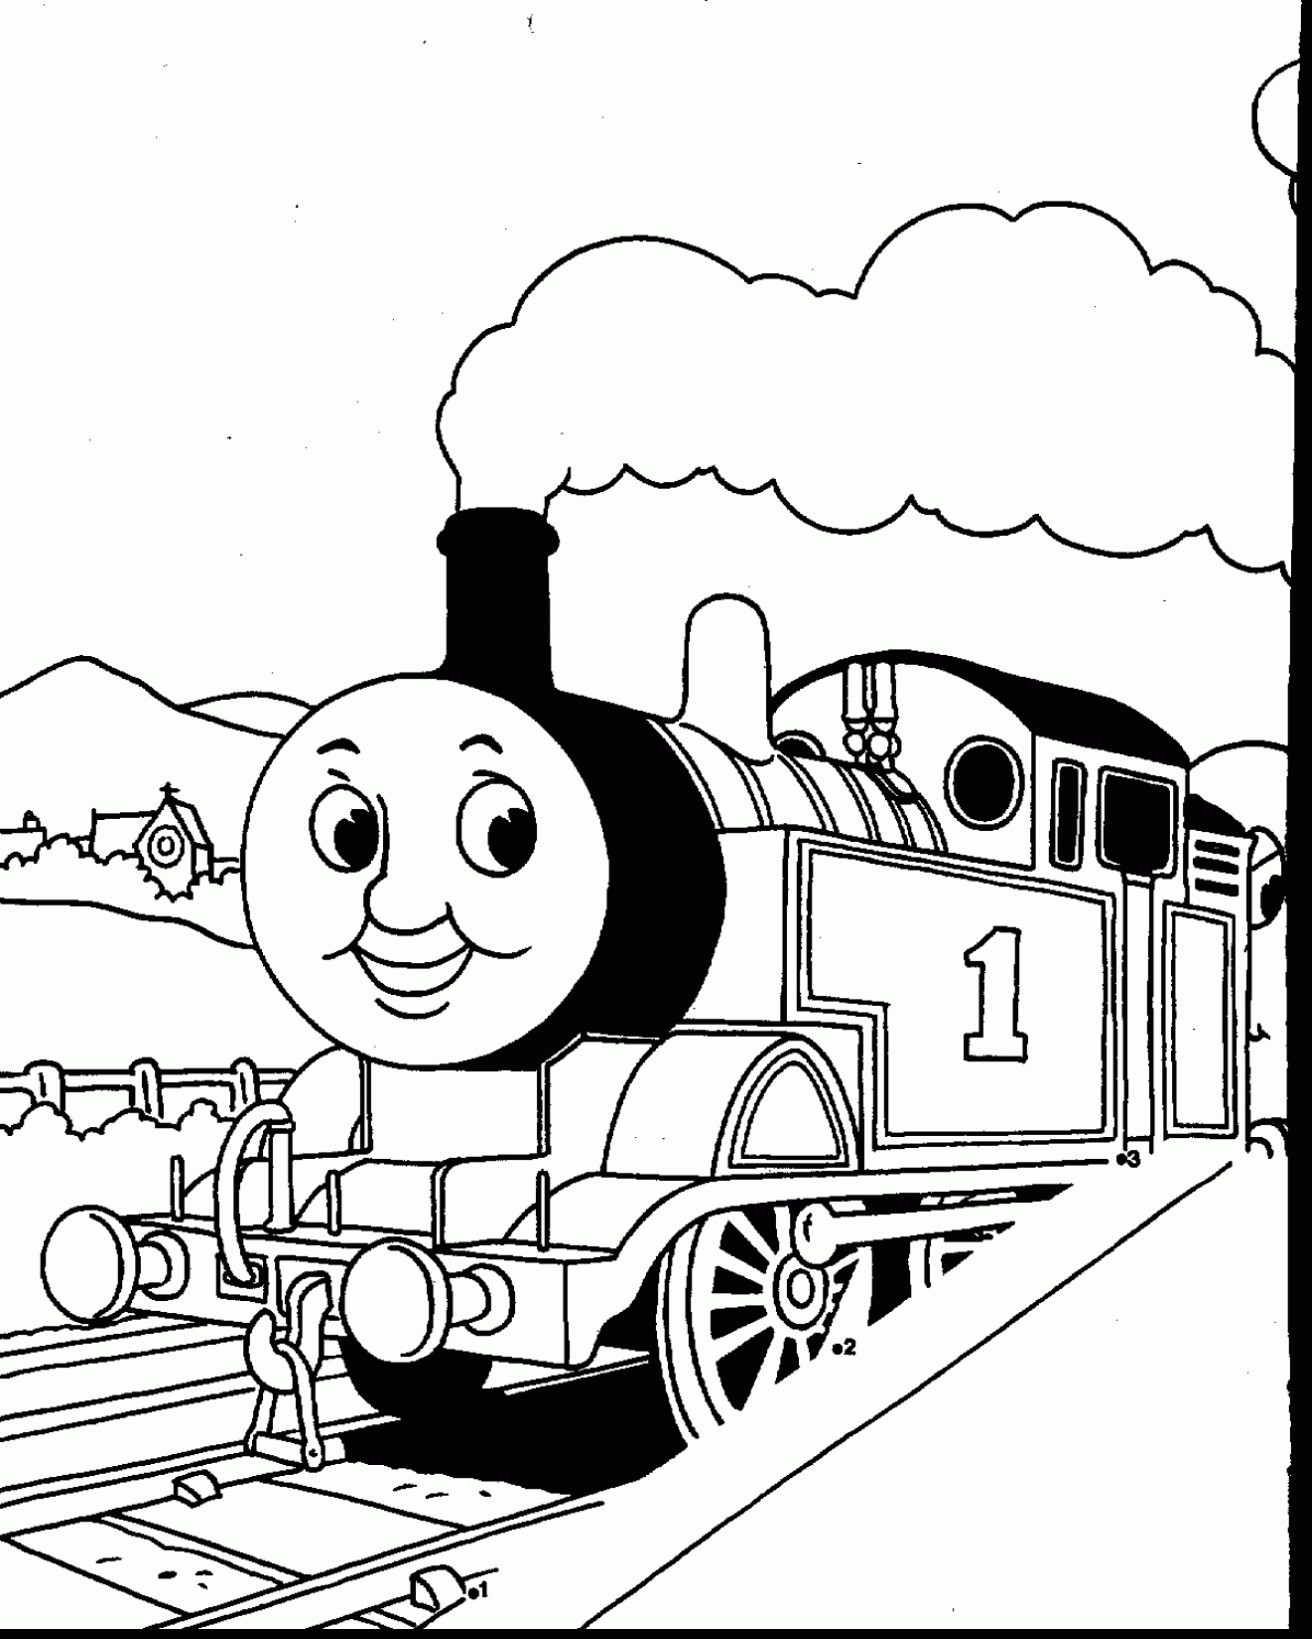 thomas-the-train-drawing-at-paintingvalley-explore-collection-of-thomas-the-train-drawing